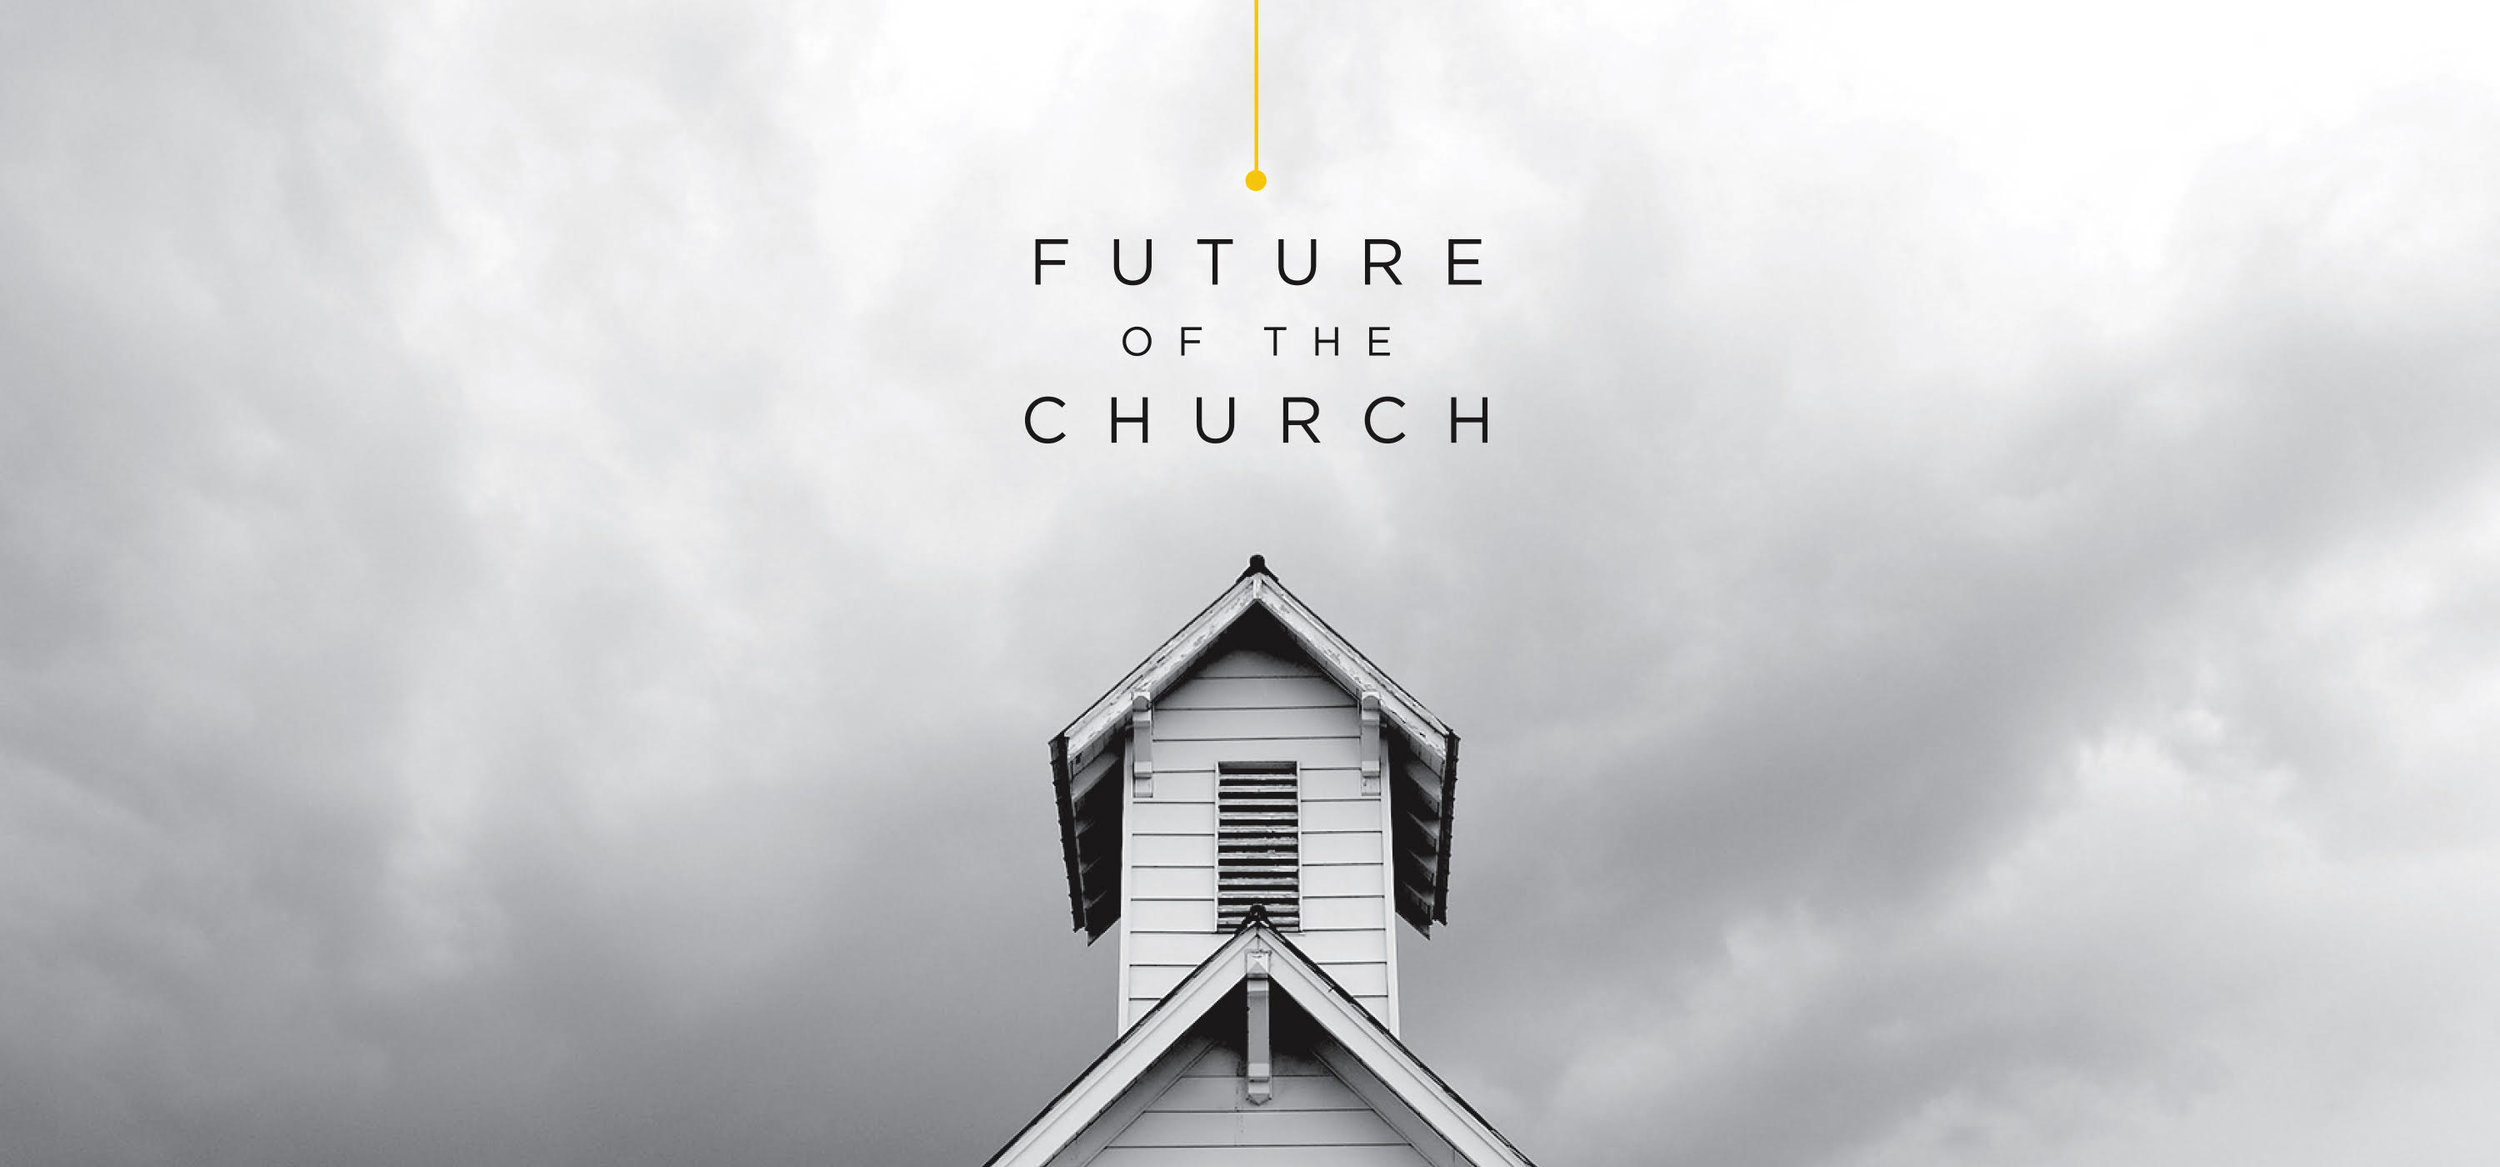 What's Emerging in the Future of the Church?